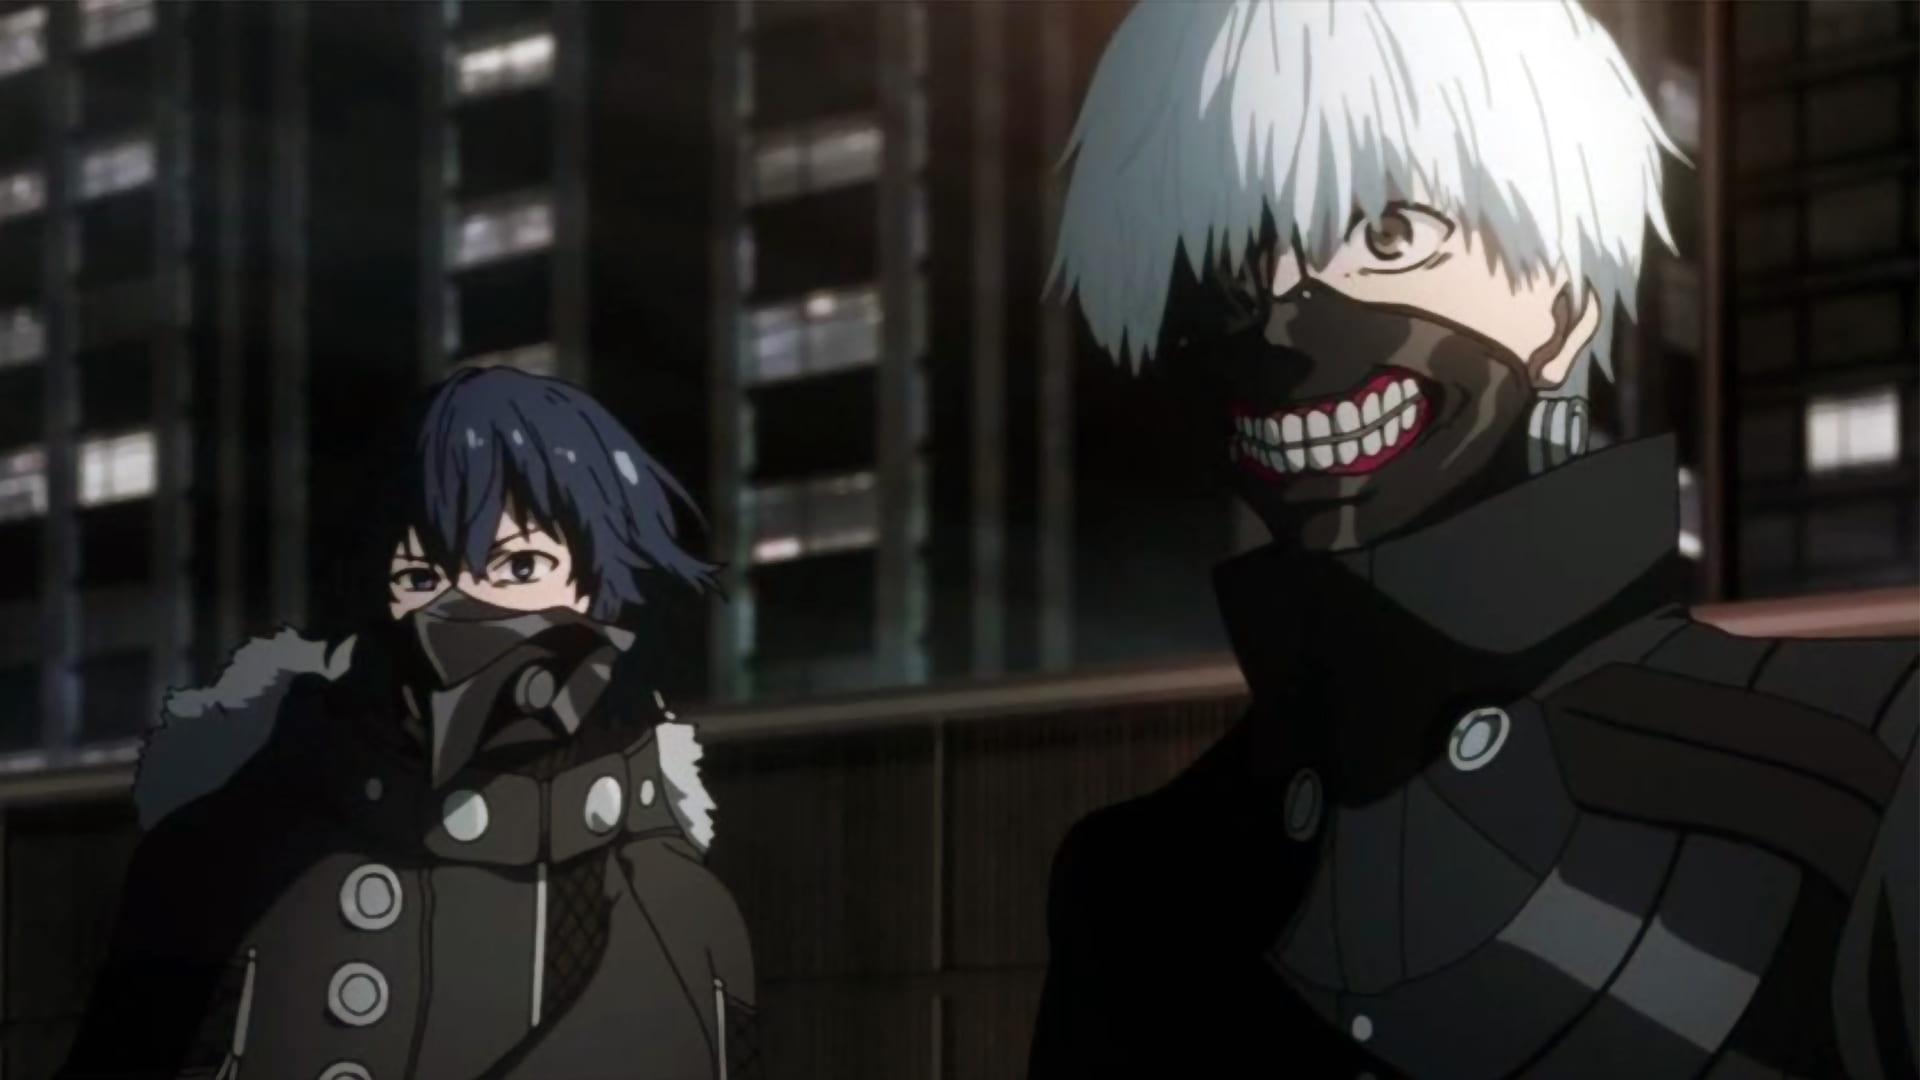 Tokyo Ghoul background image